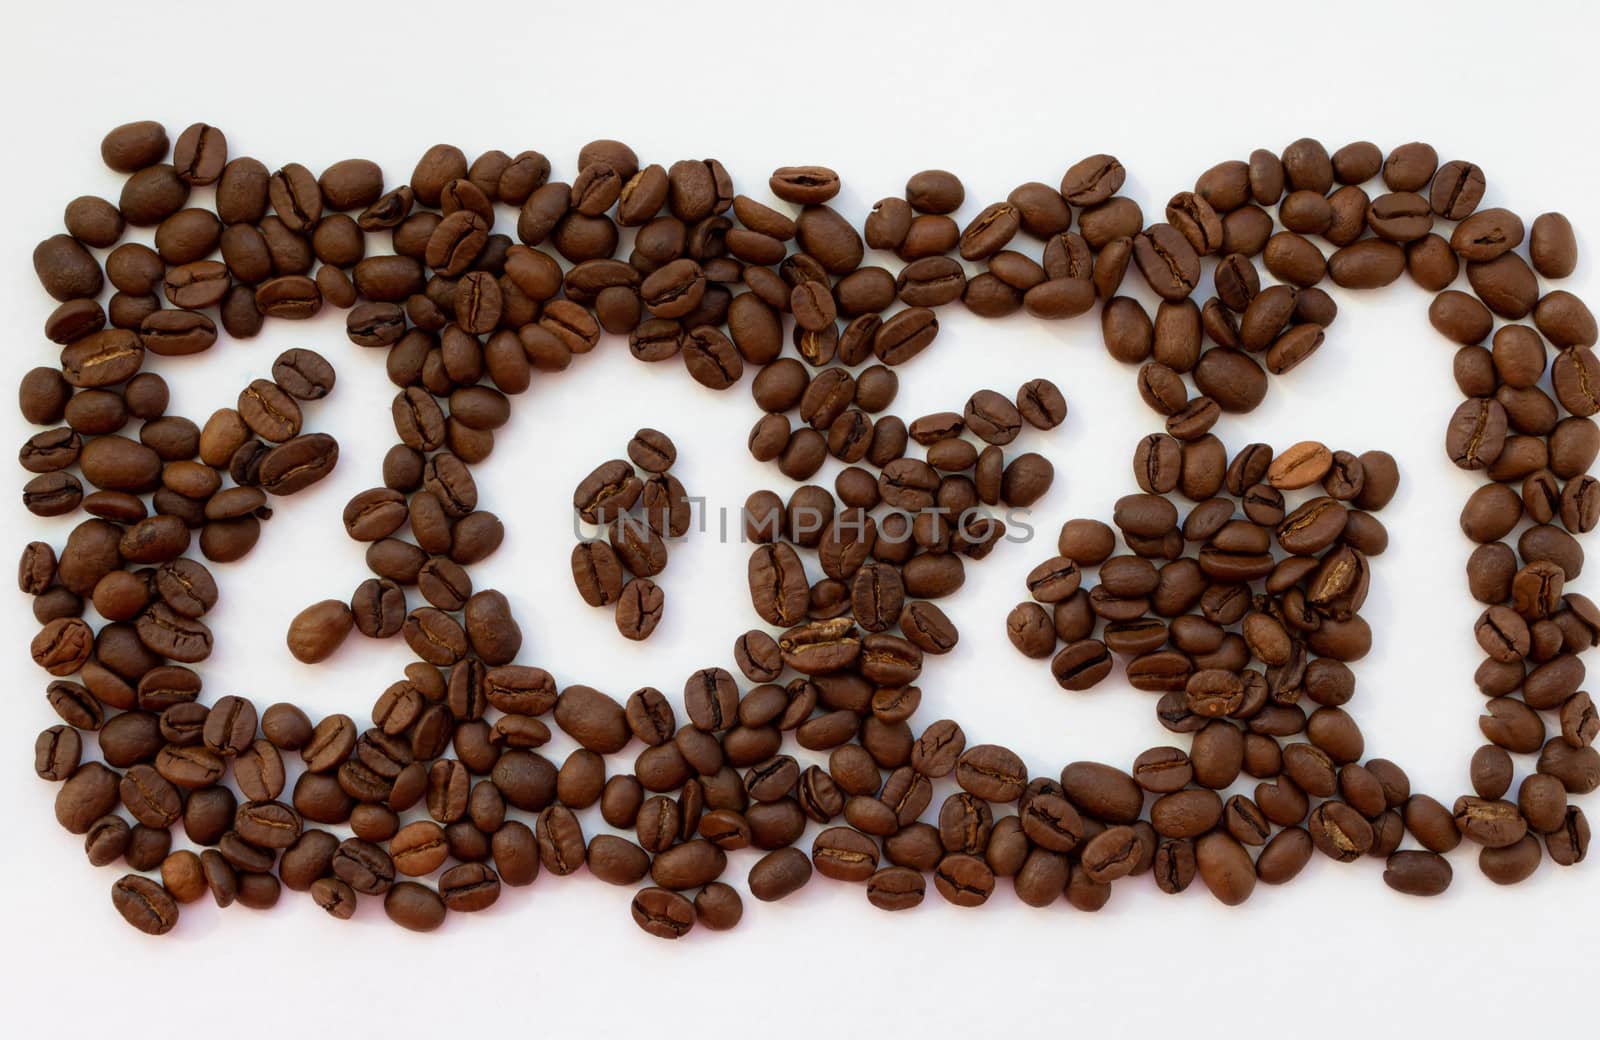 The number 2021 in coffee beans isolated on a white background.The concept of the new year